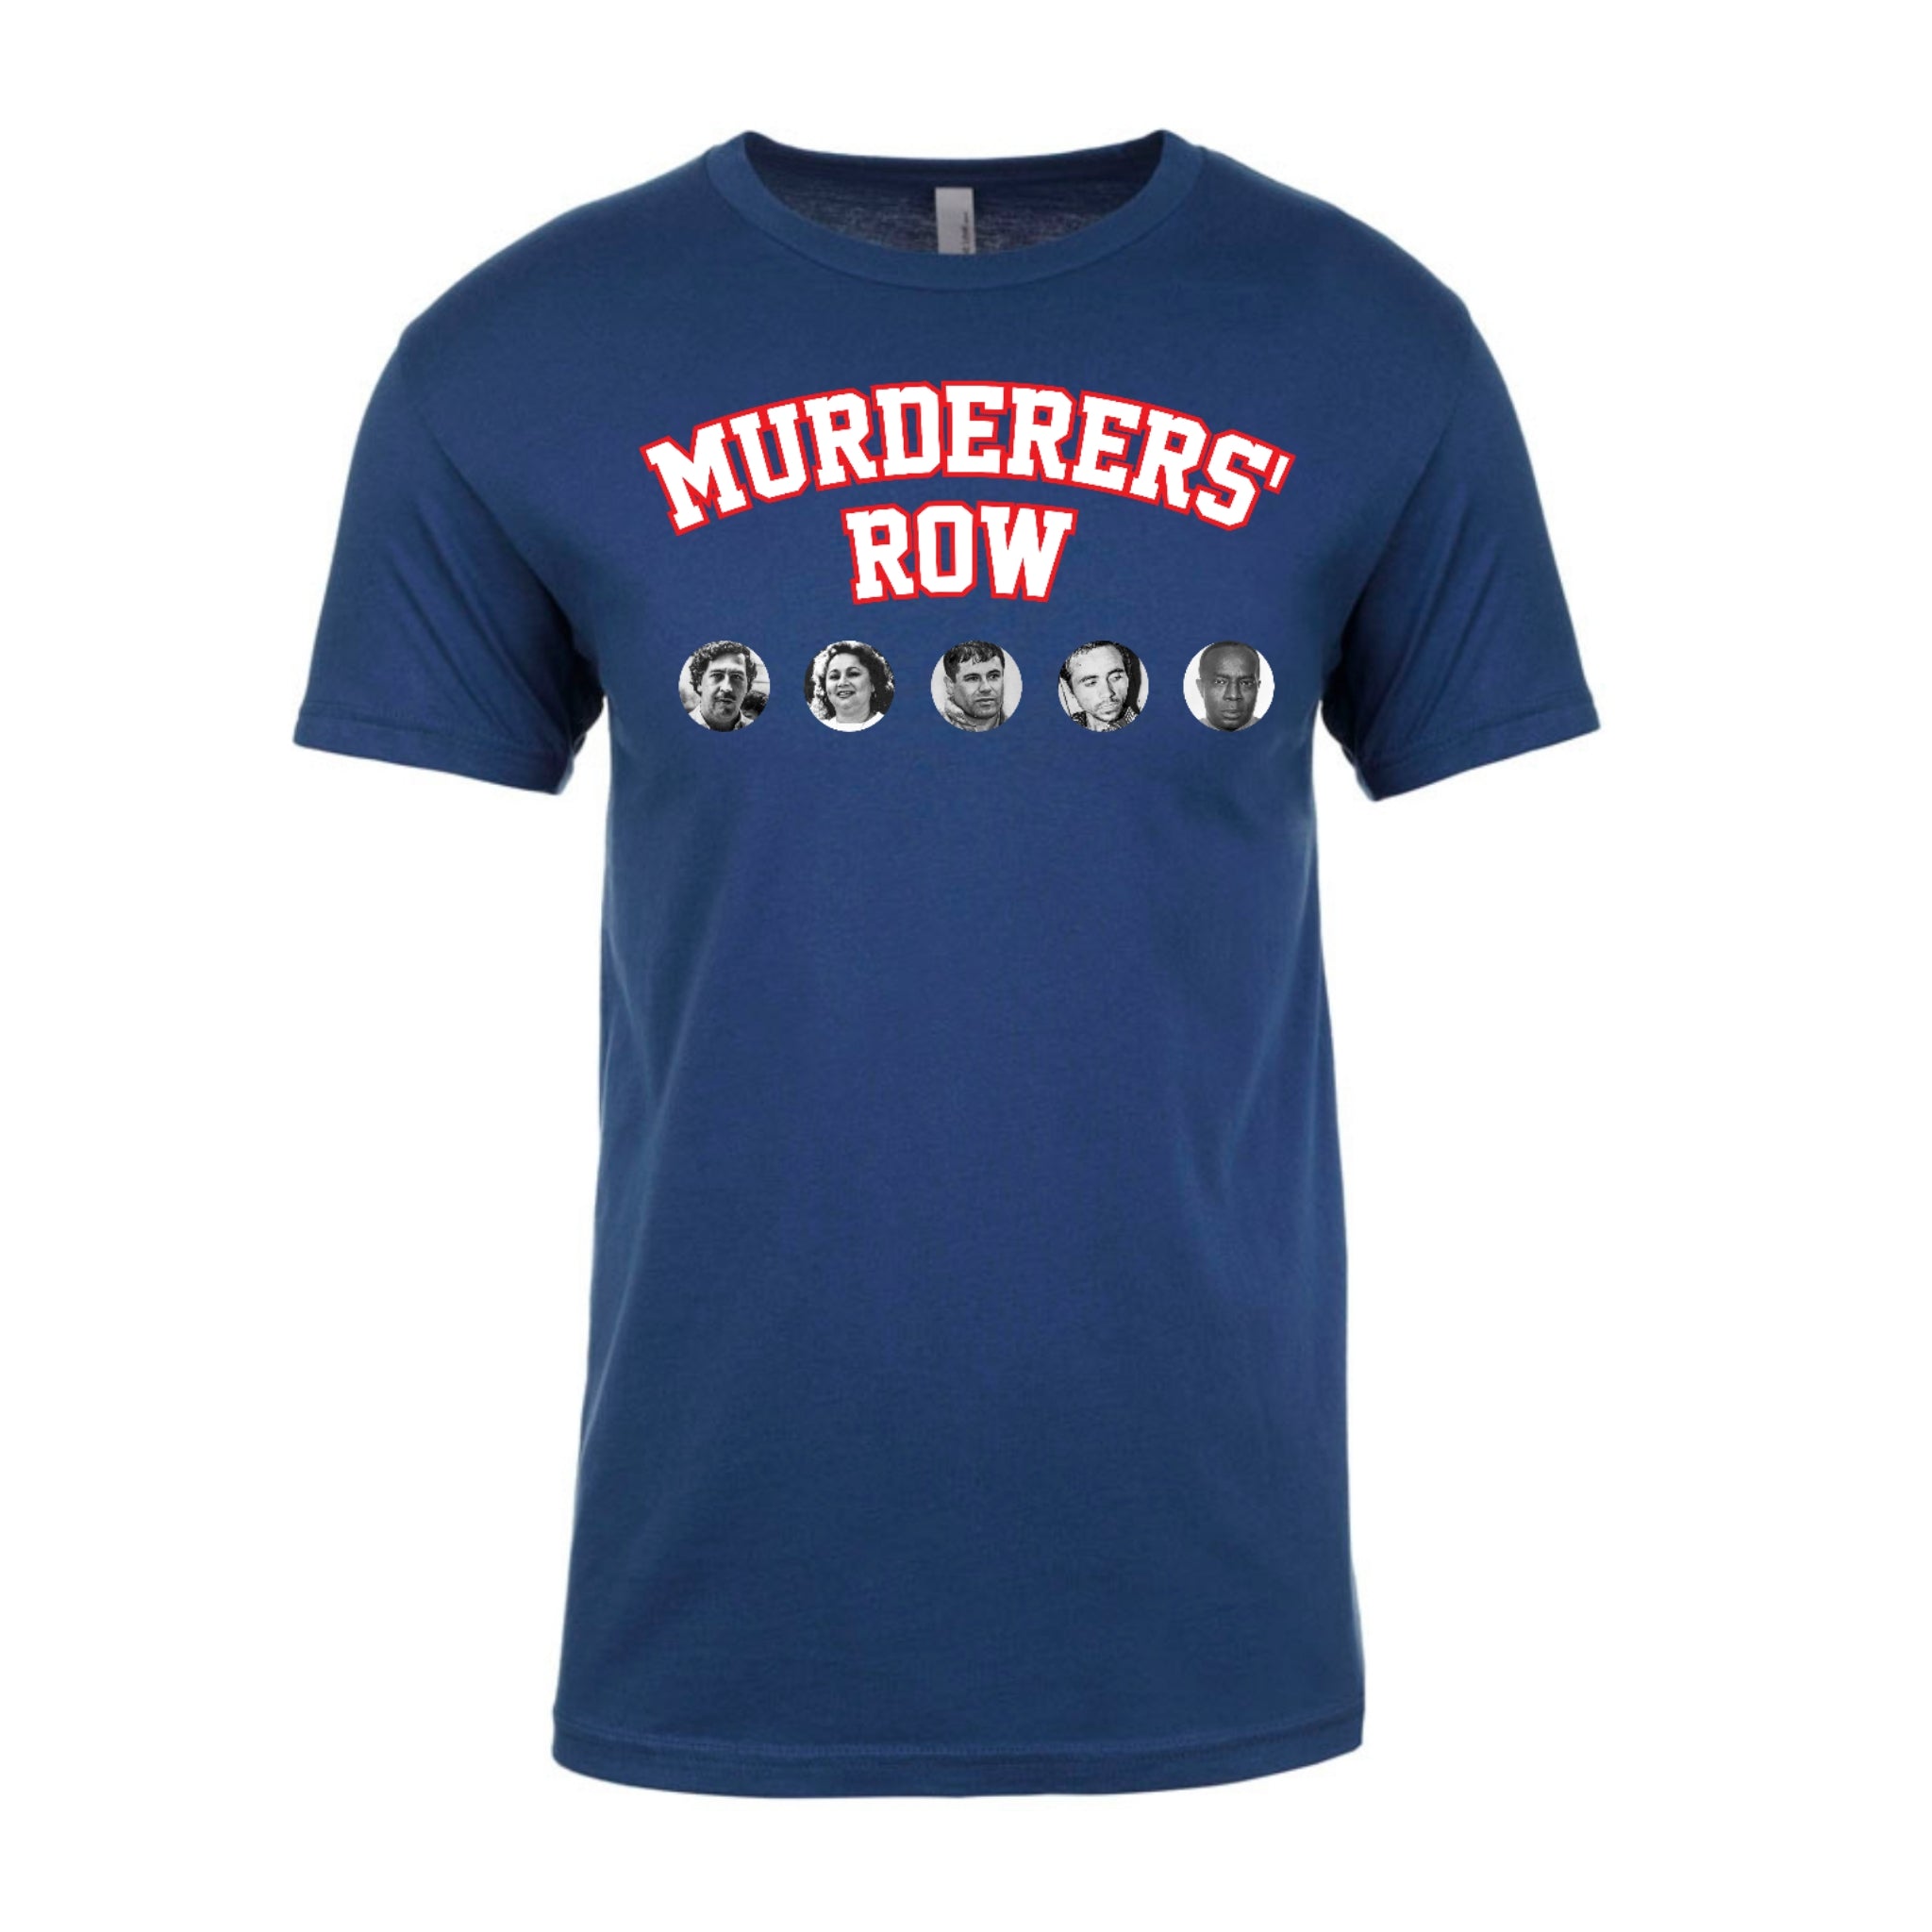 Murderers Row Clothing